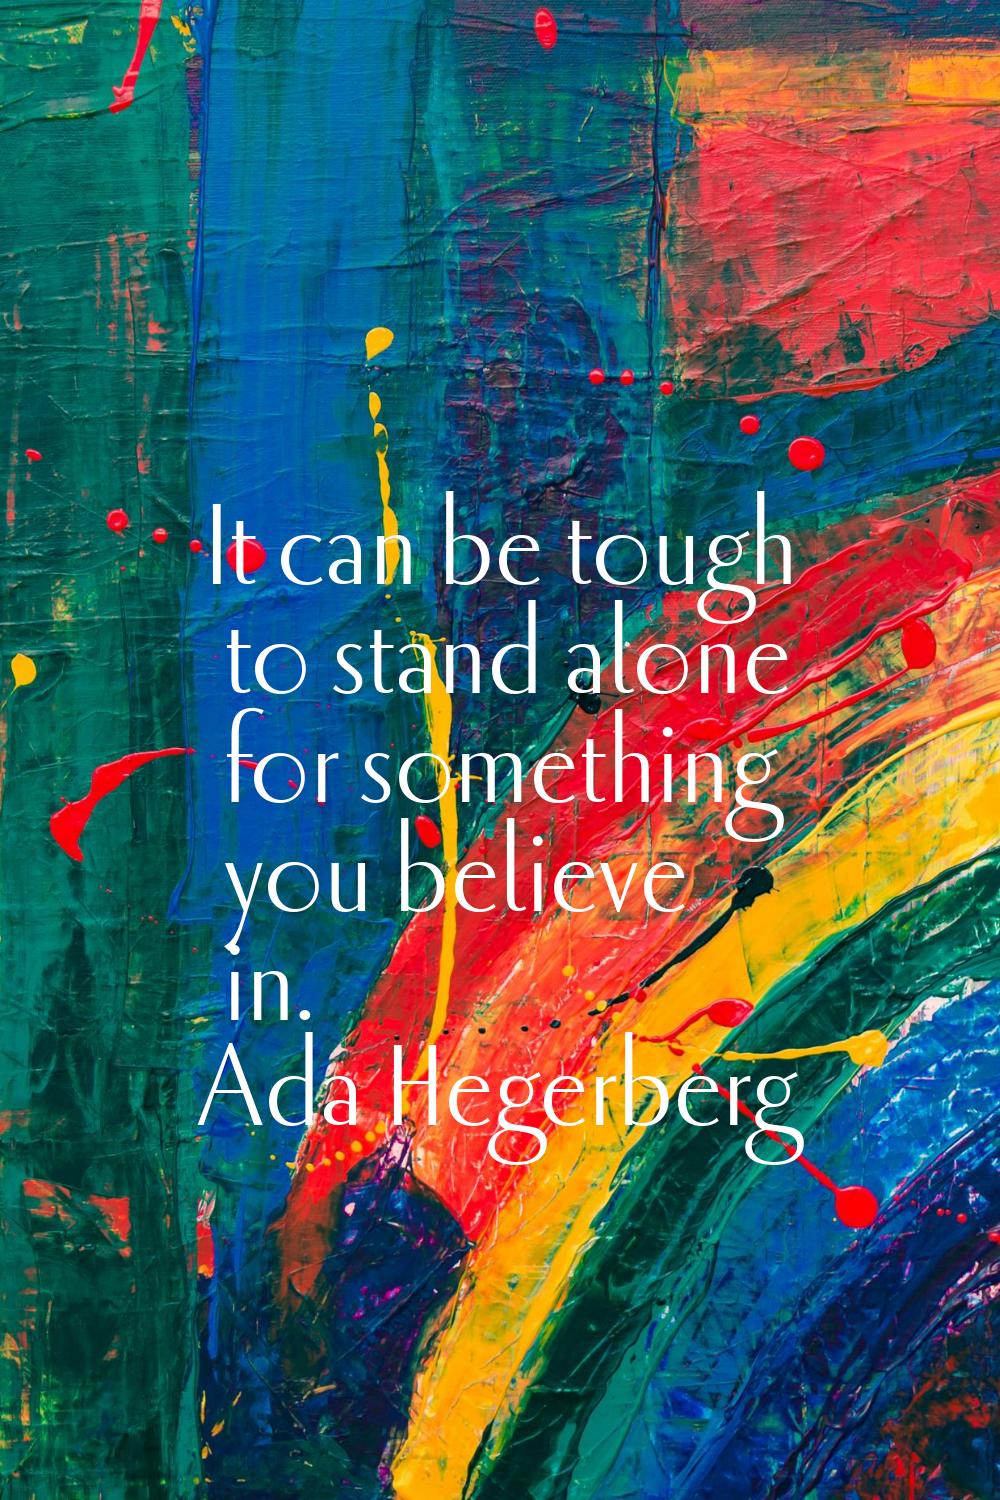 It can be tough to stand alone for something you believe in.